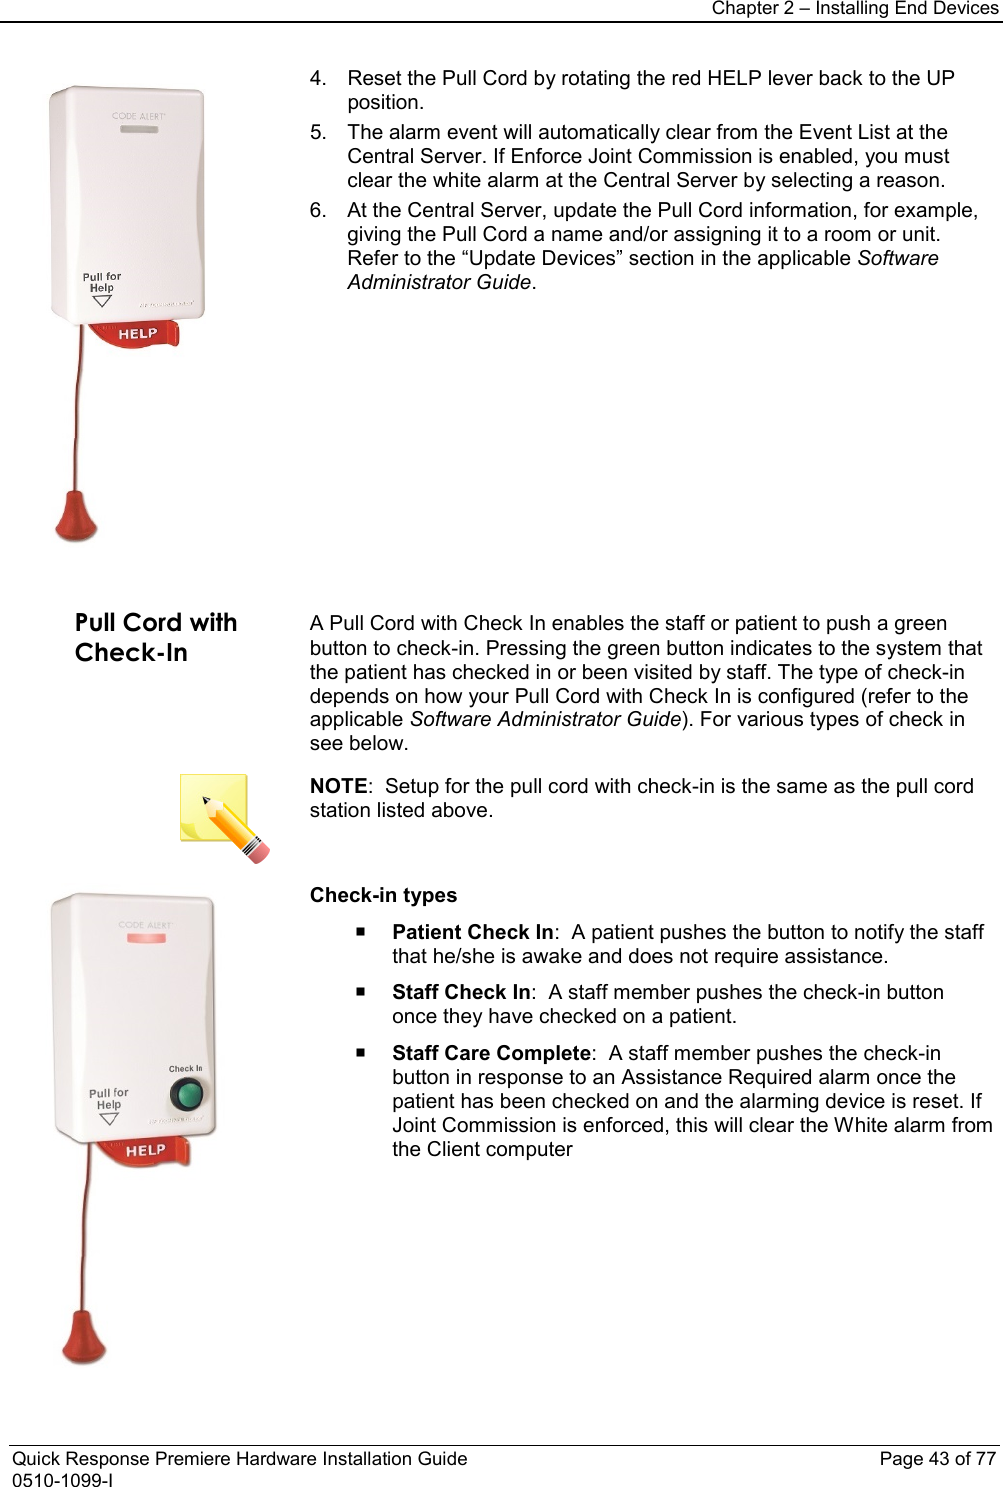 Chapter 2 – Installing End Devices  Quick Response Premiere Hardware Installation Guide    Page 43 of 77 0510-1099-I  4. Reset the Pull Cord by rotating the red HELP lever back to the UP position.  5. The alarm event will automatically clear from the Event List at the Central Server. If Enforce Joint Commission is enabled, you must clear the white alarm at the Central Server by selecting a reason. 6. At the Central Server, update the Pull Cord information, for example, giving the Pull Cord a name and/or assigning it to a room or unit. Refer to the “Update Devices” section in the applicable Software Administrator Guide.    Pull Cord with Check-In  A Pull Cord with Check In enables the staff or patient to push a green button to check-in. Pressing the green button indicates to the system that the patient has checked in or been visited by staff. The type of check-in depends on how your Pull Cord with Check In is configured (refer to the applicable Software Administrator Guide). For various types of check in see below.  NOTE:  Setup for the pull cord with check-in is the same as the pull cord station listed above.  Check-in types  Patient Check In:  A patient pushes the button to notify the staff that he/she is awake and does not require assistance.   Staff Check In:  A staff member pushes the check-in button once they have checked on a patient.   Staff Care Complete:  A staff member pushes the check-in button in response to an Assistance Required alarm once the patient has been checked on and the alarming device is reset. If Joint Commission is enforced, this will clear the White alarm from the Client computer 